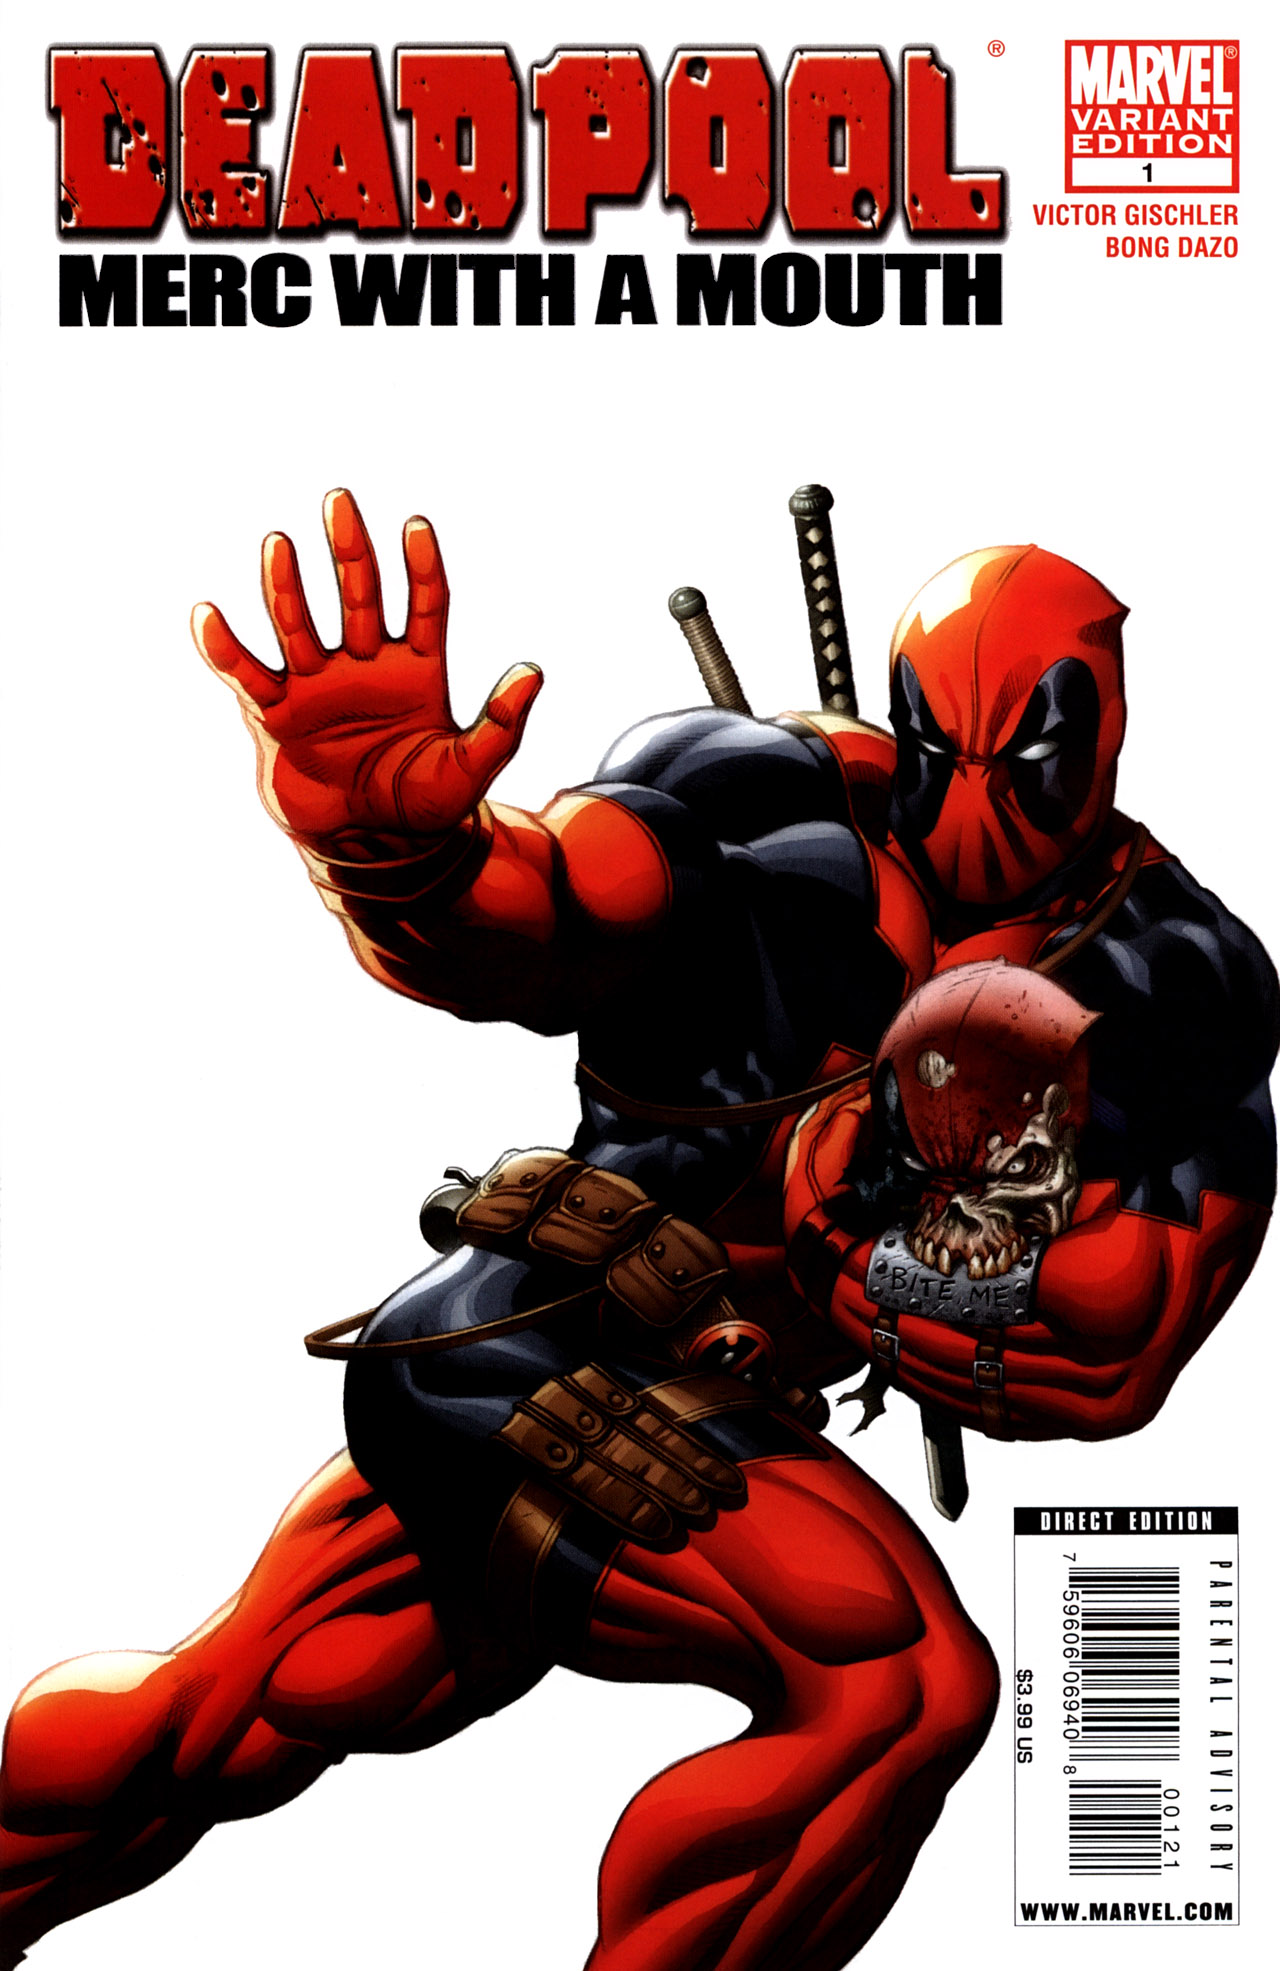 Dead Pool Merc with a mouth 1